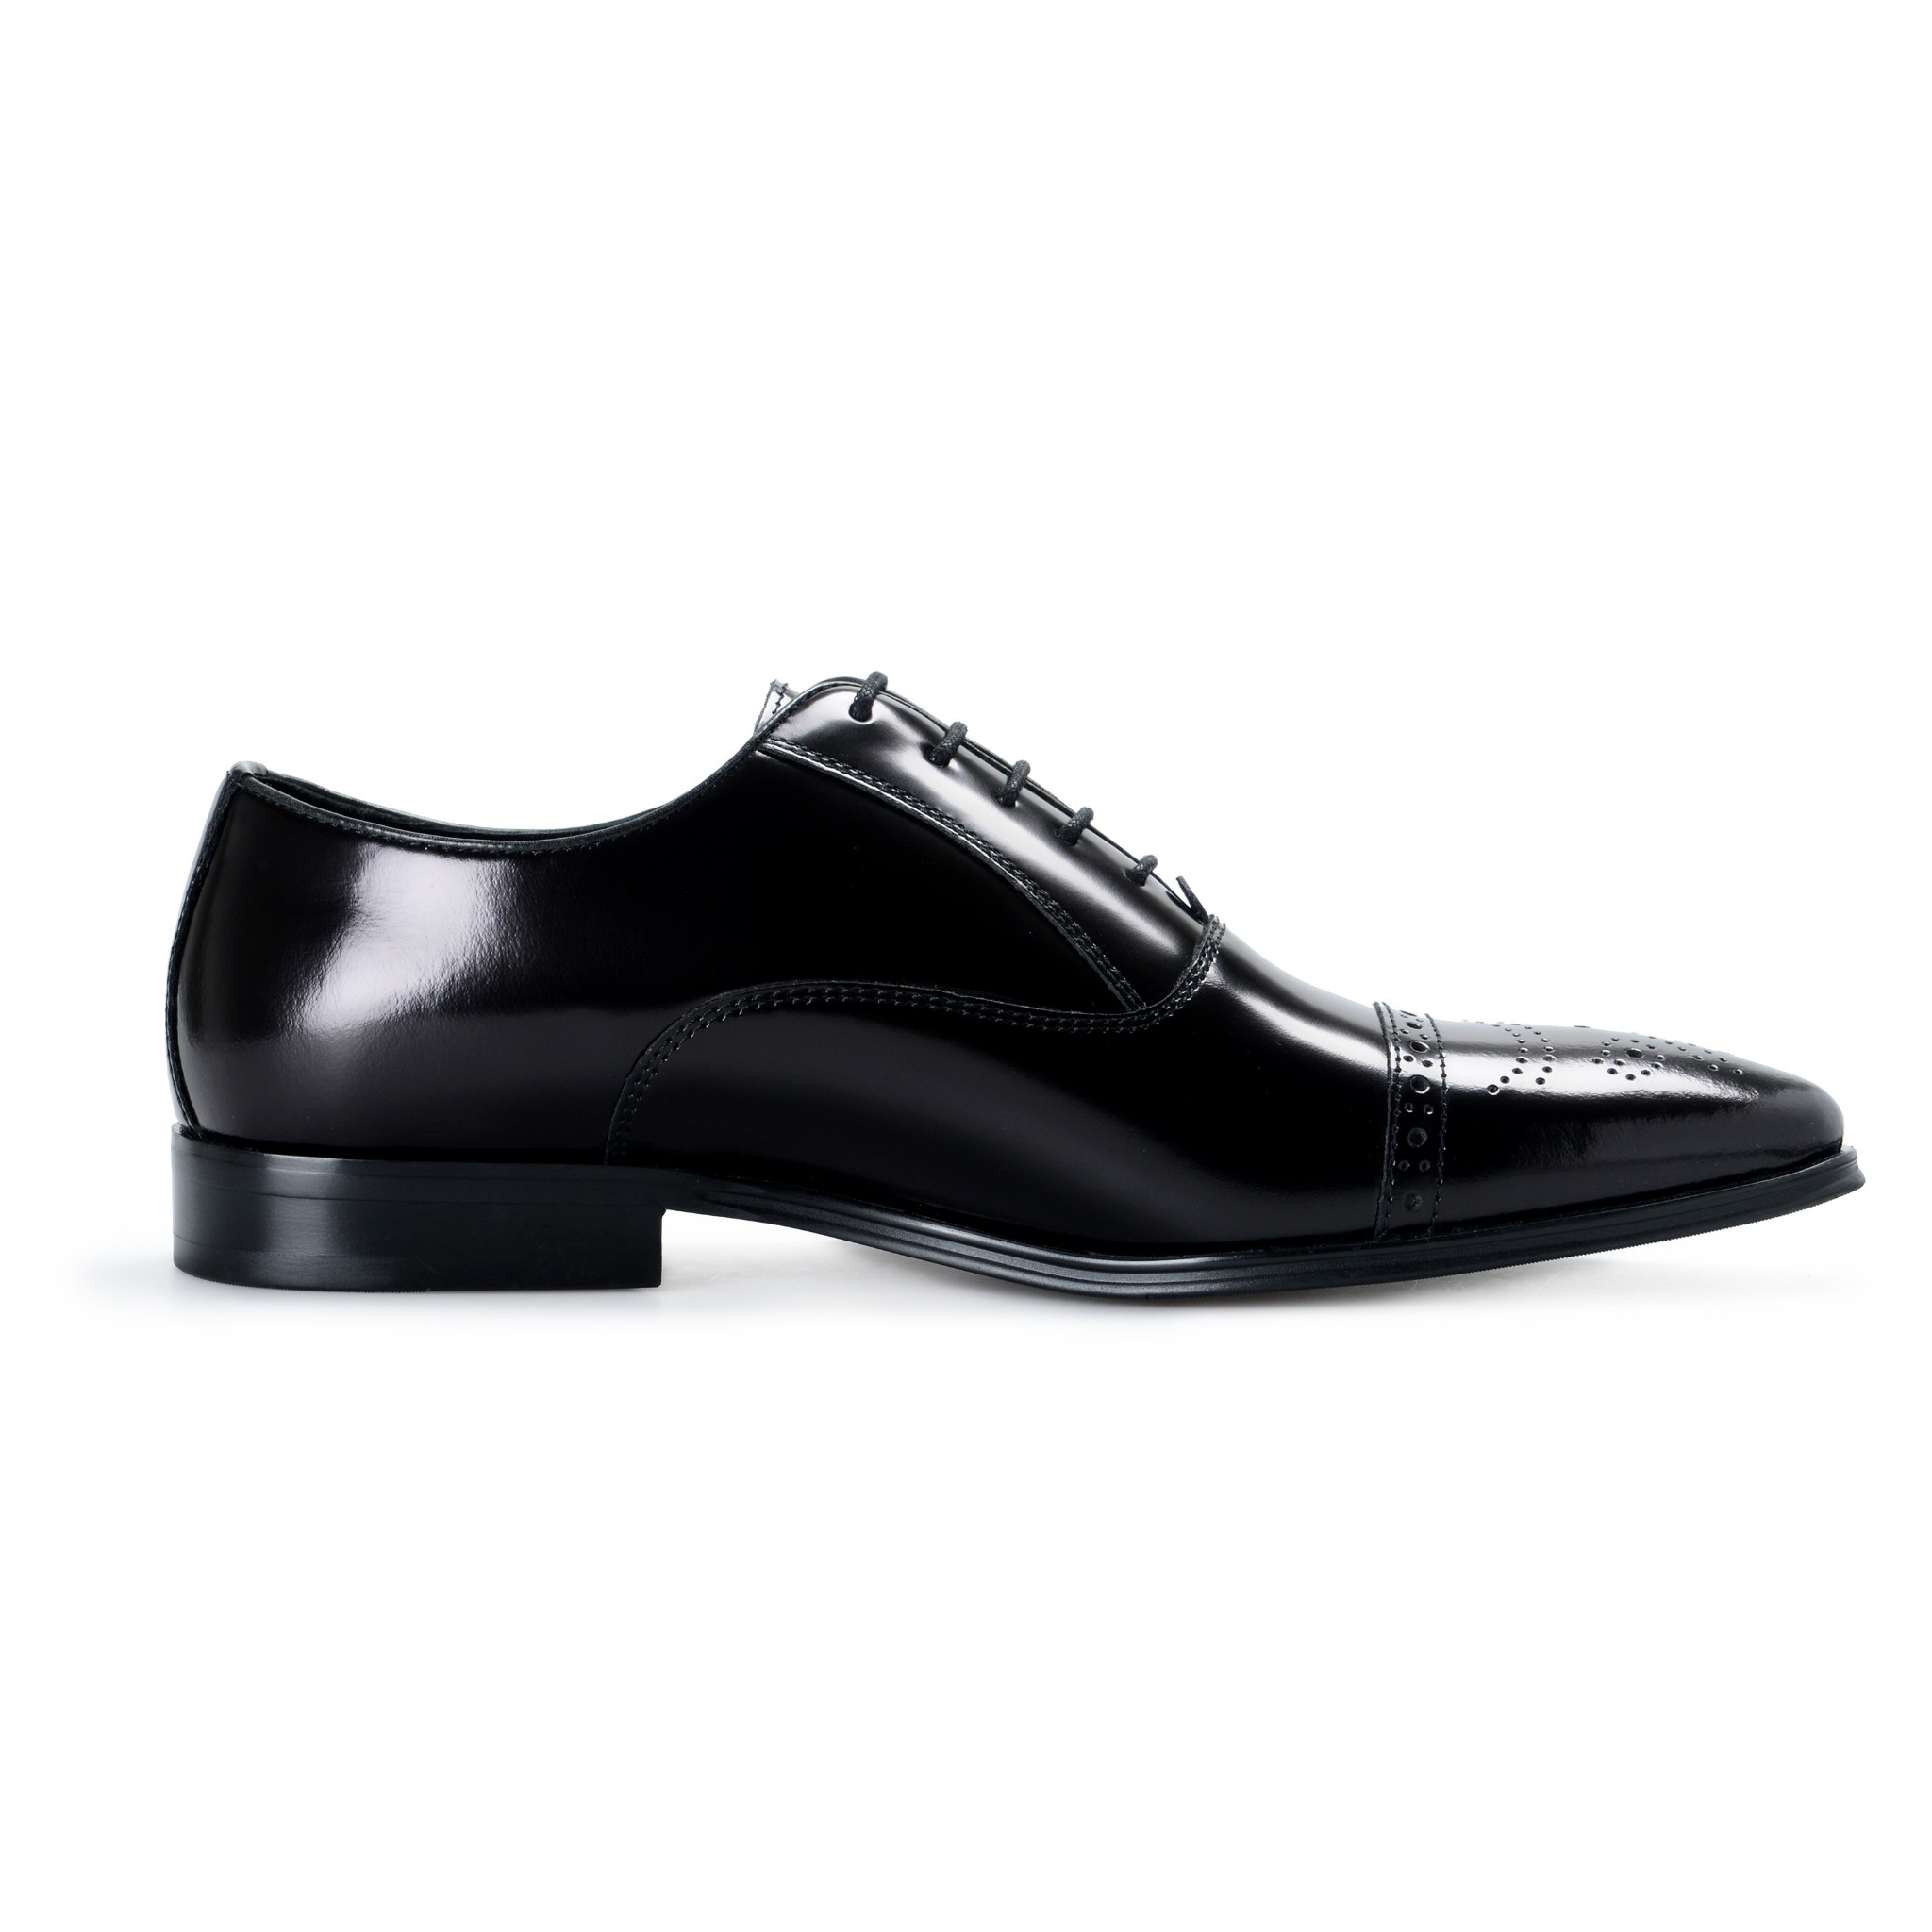 Versace Collection Men's Black Leather Lace Up Wing Tip Oxford Dress ...